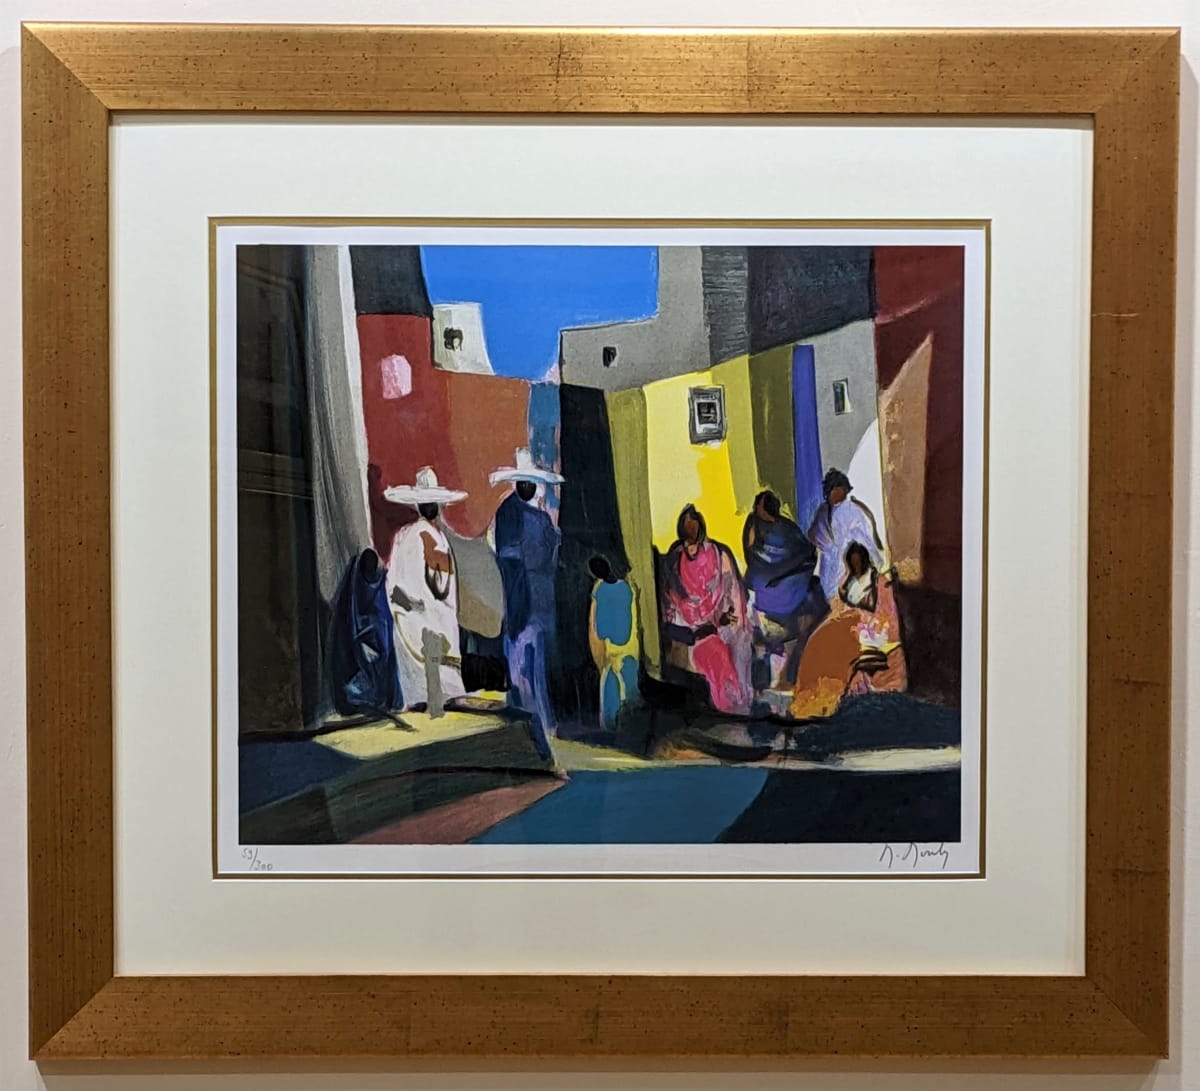 Mexicains et Mexicaines by Marcel Mouly  Image: Mexicains et Mexicaines by Marcel Mouly